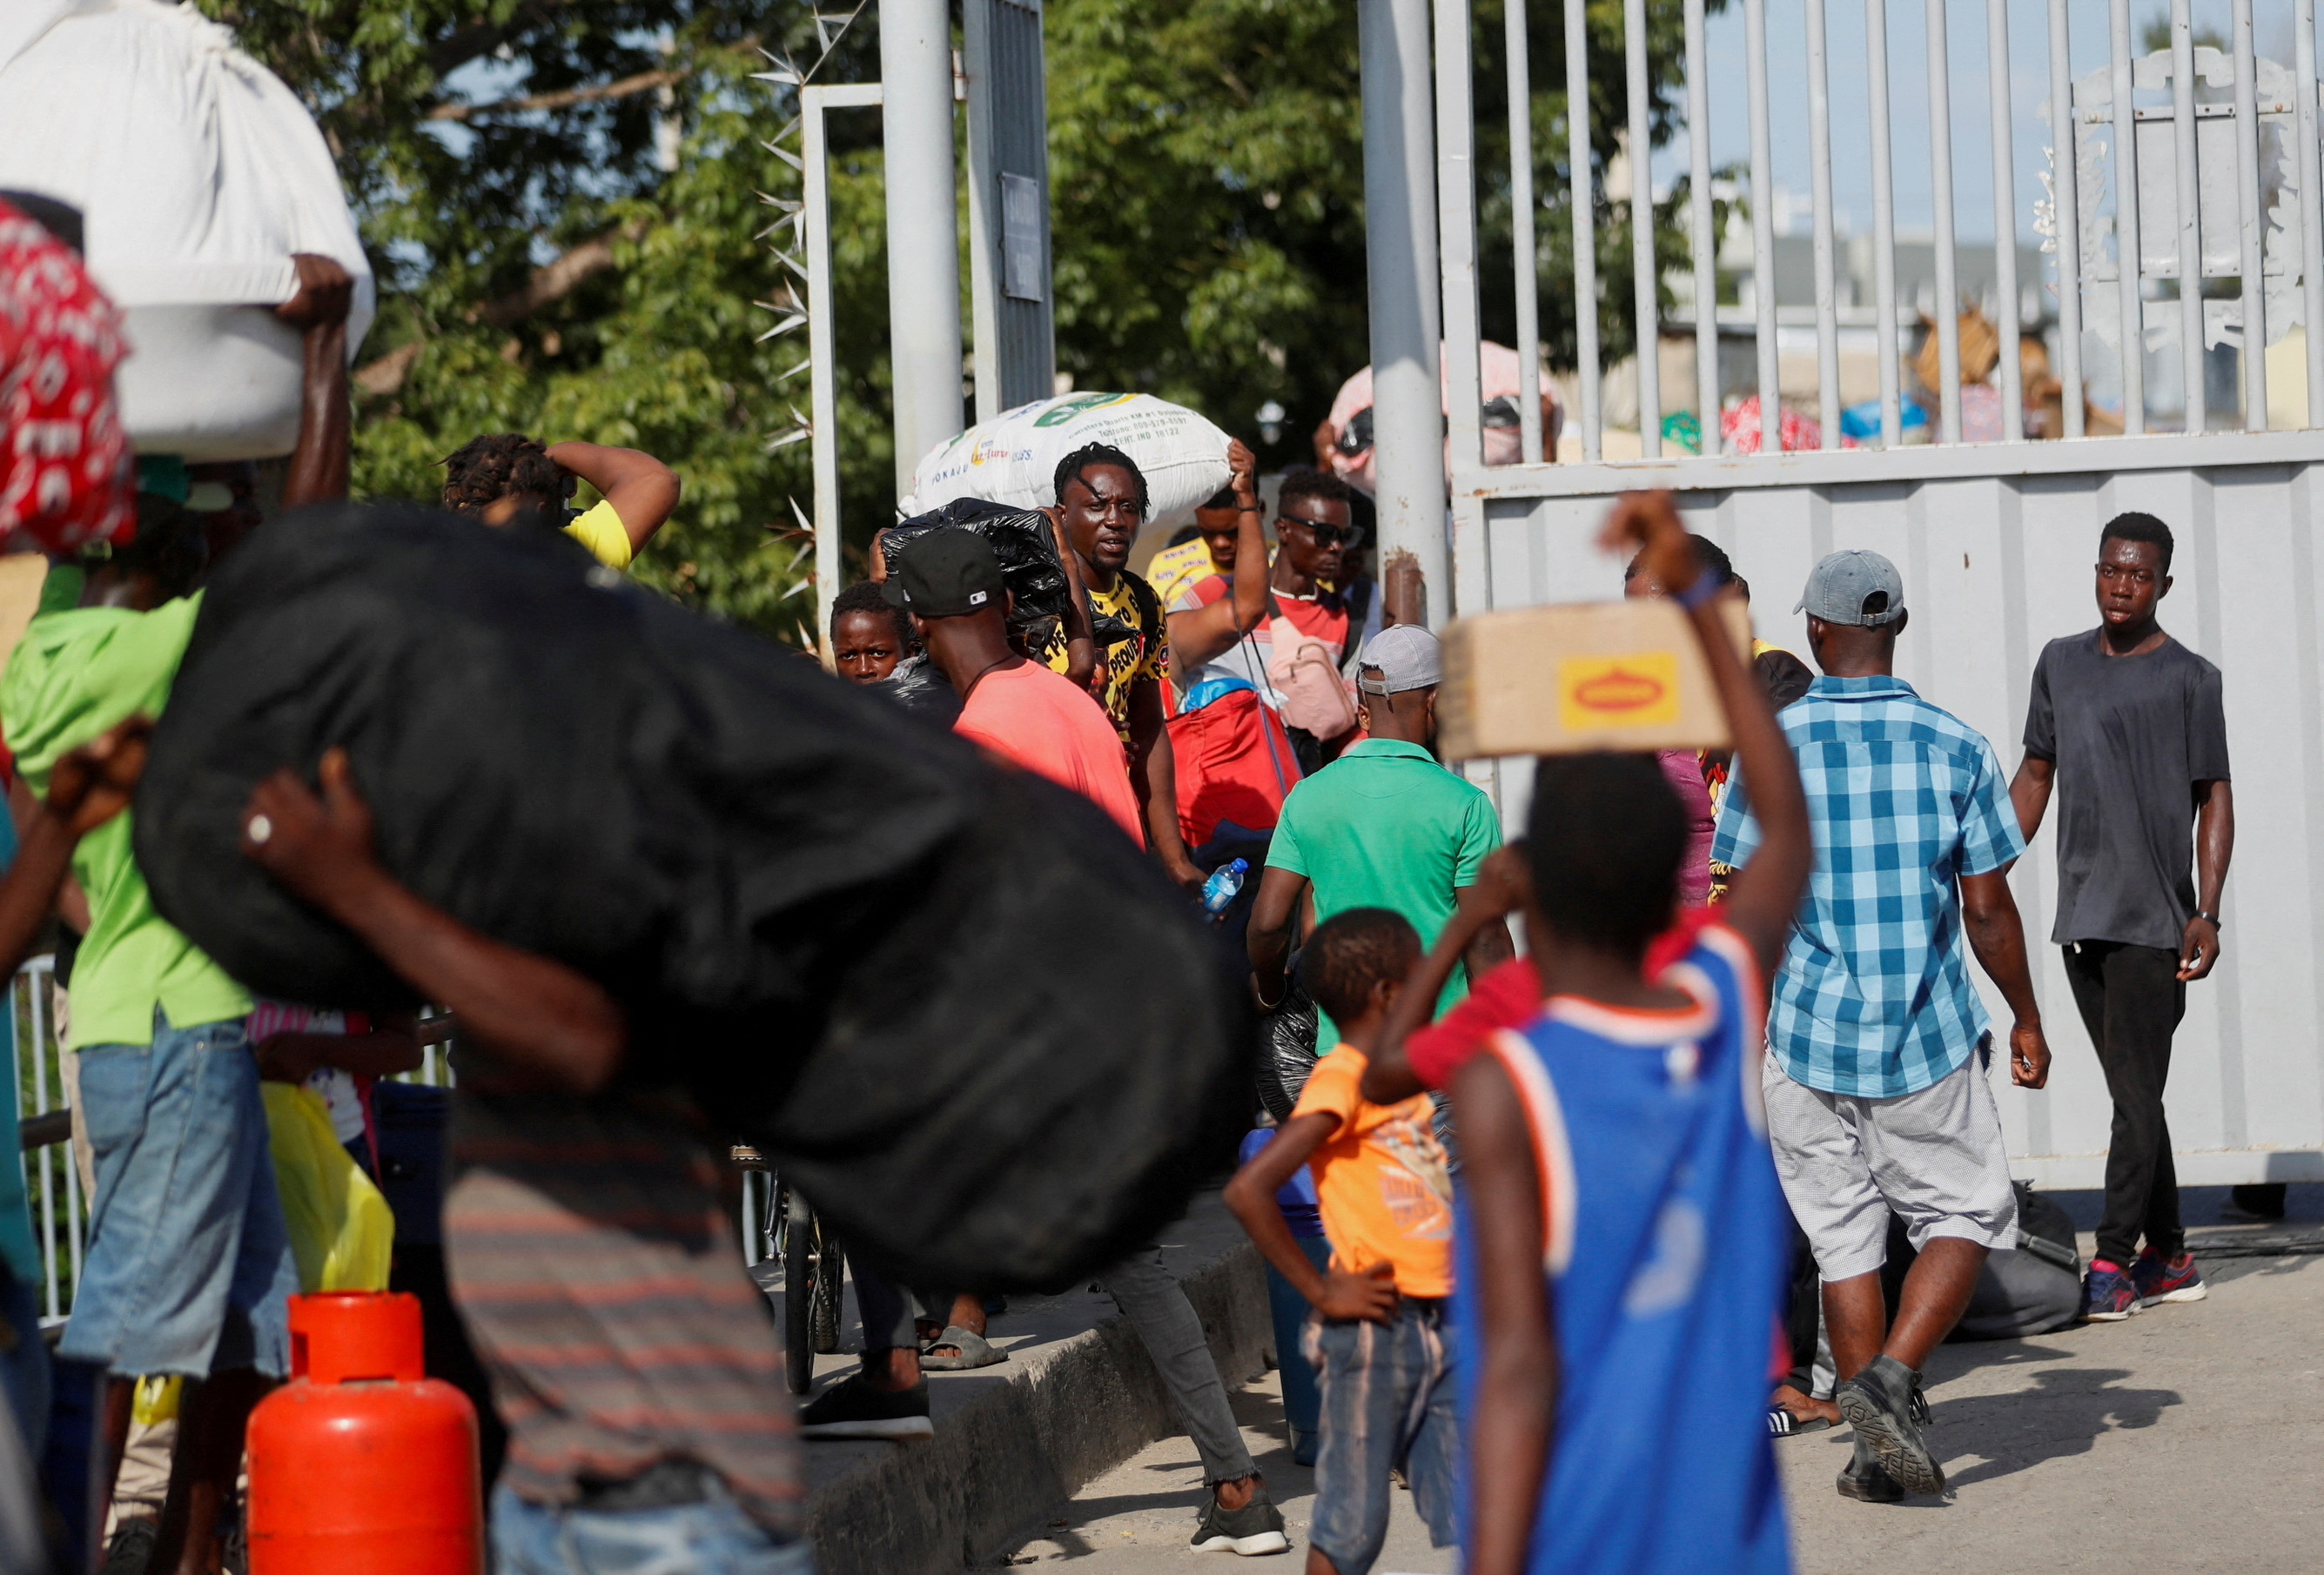 Though Haiti has dire security needs, it cannot overshadow people's  humanitarian needs